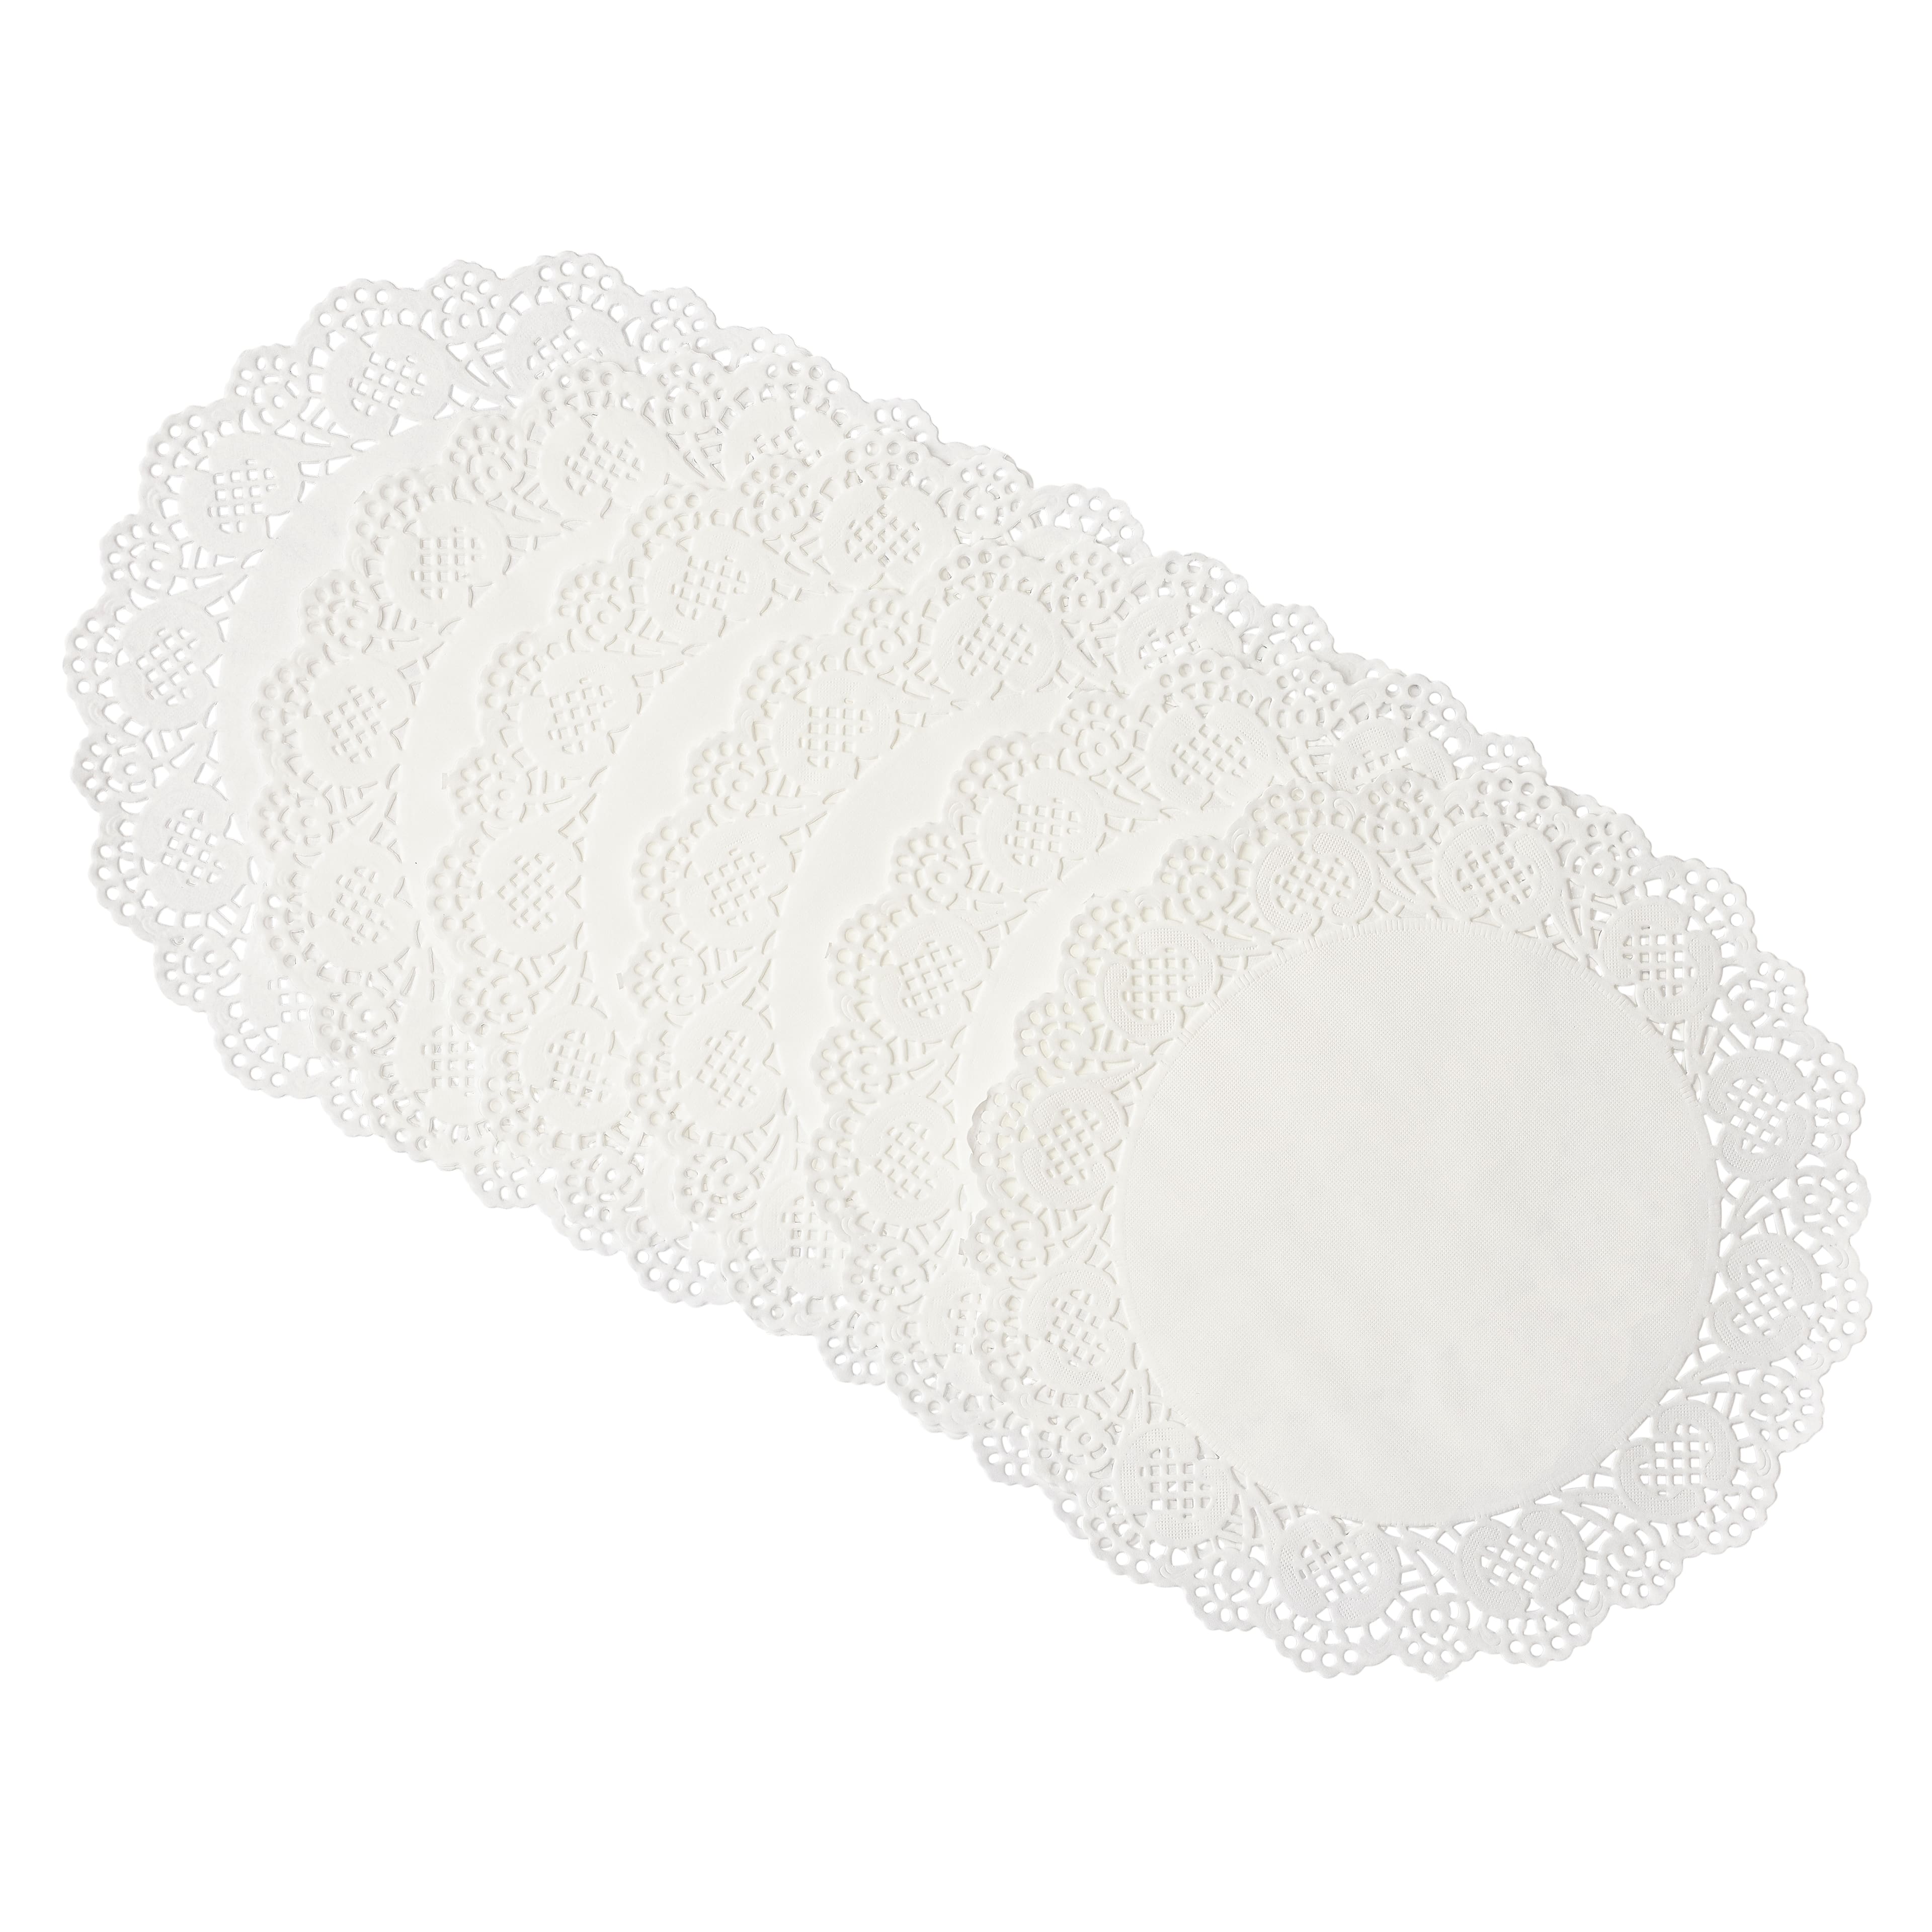 12 Packs: 6 ct. (72 total) 10 Paper Doilies by Celebrate It®